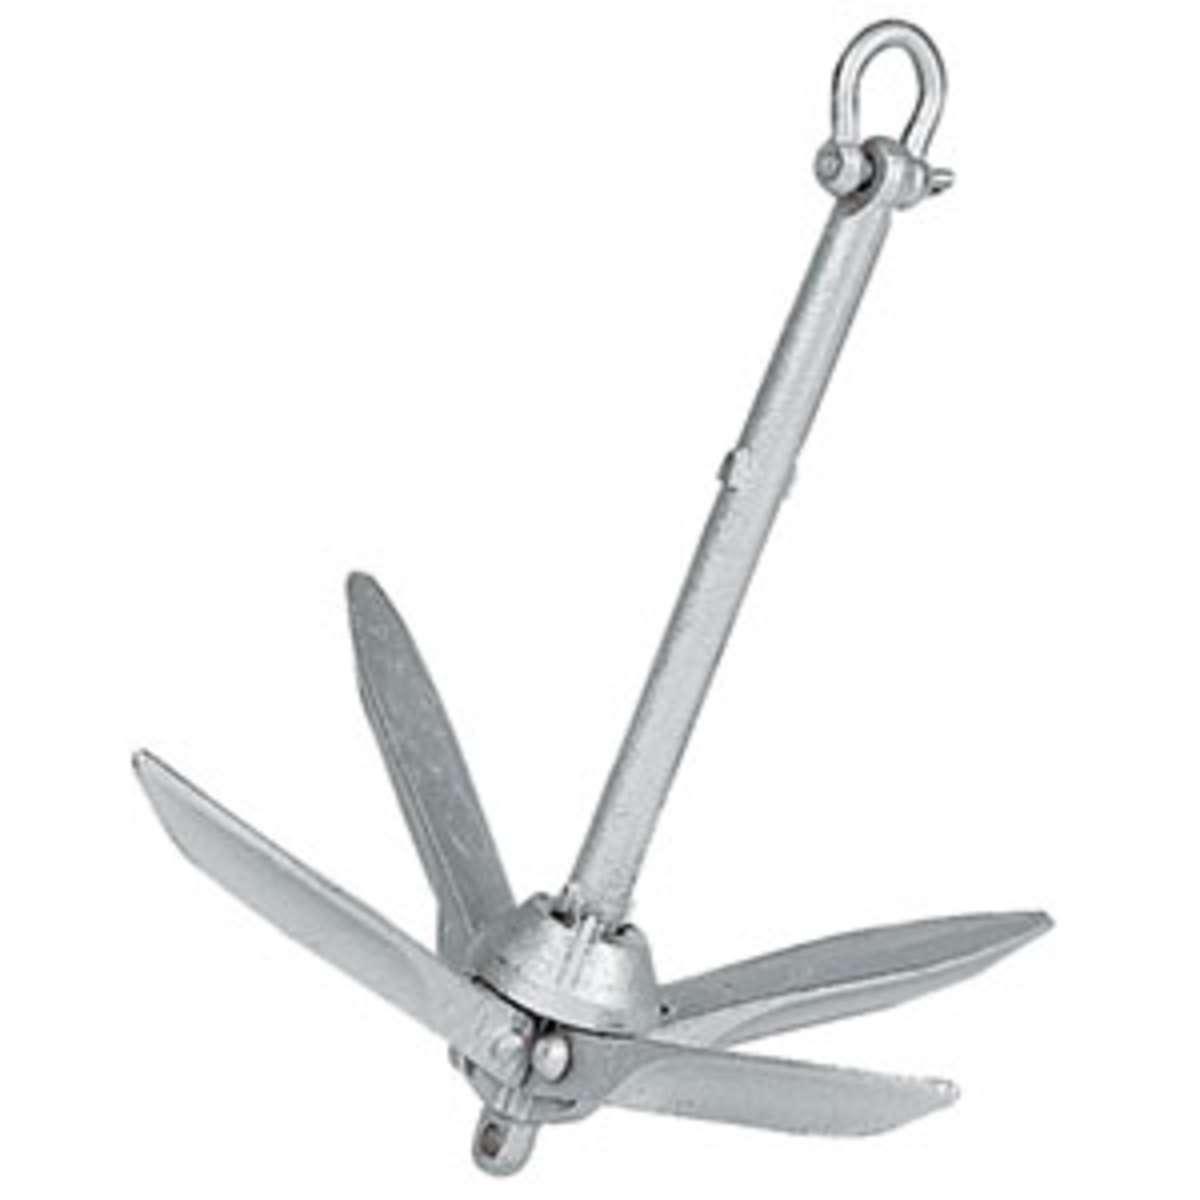 This model is collapsible and is perfect for modifying it into a 'breakaway' anchor, specifically for reef fishing.